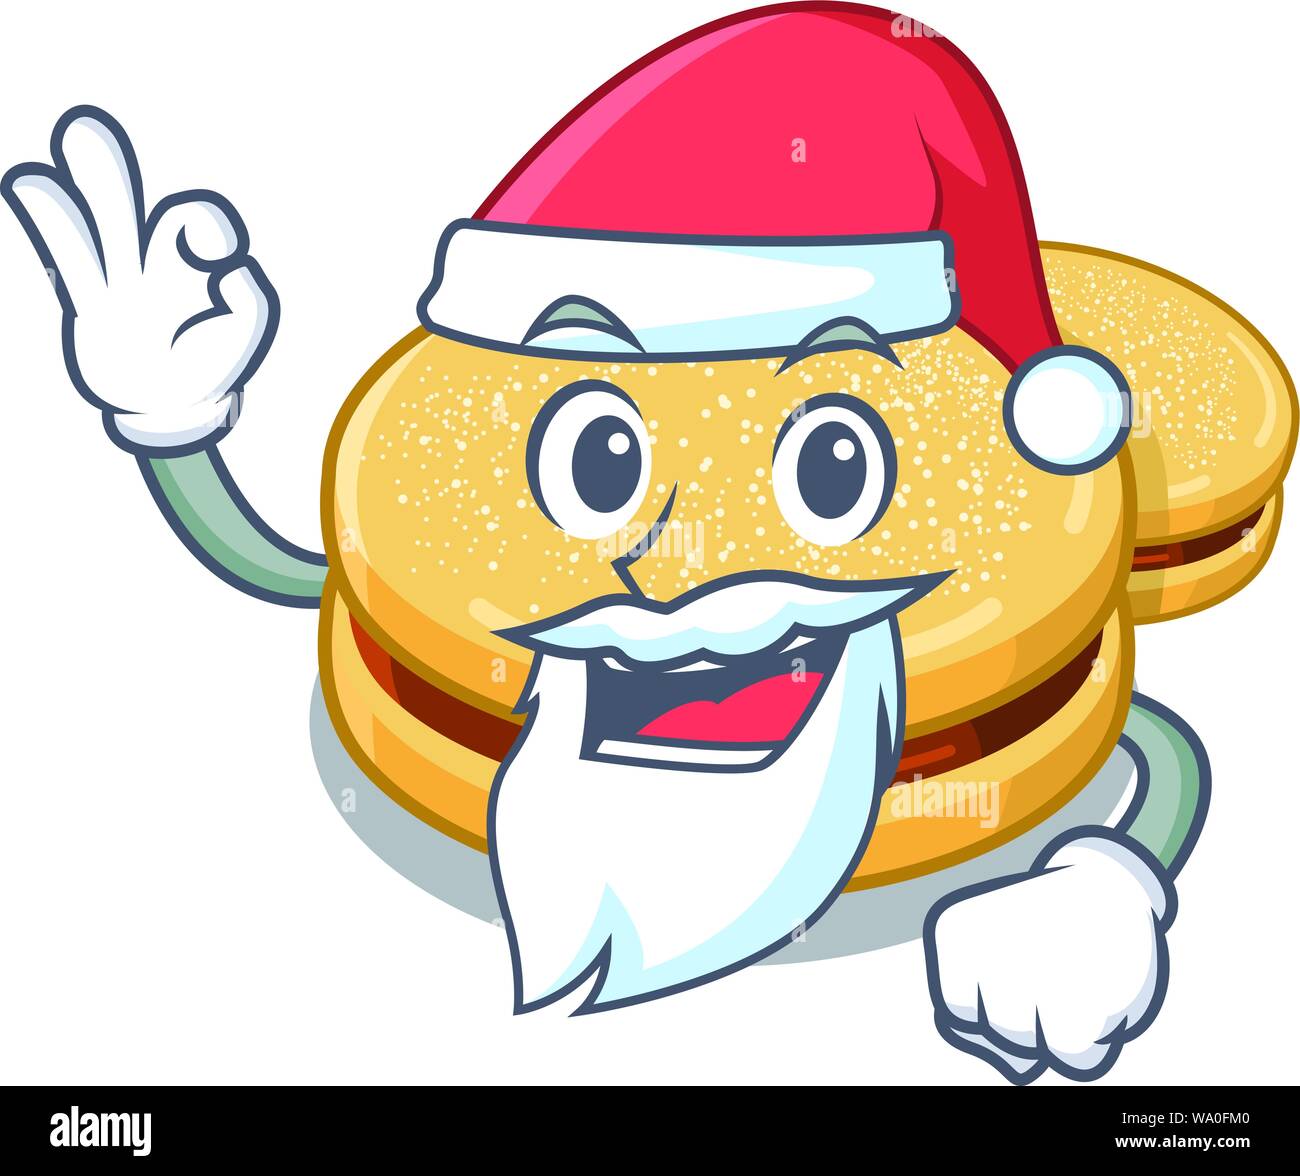 Santa alfajores isolated with in the mascot Stock Vector